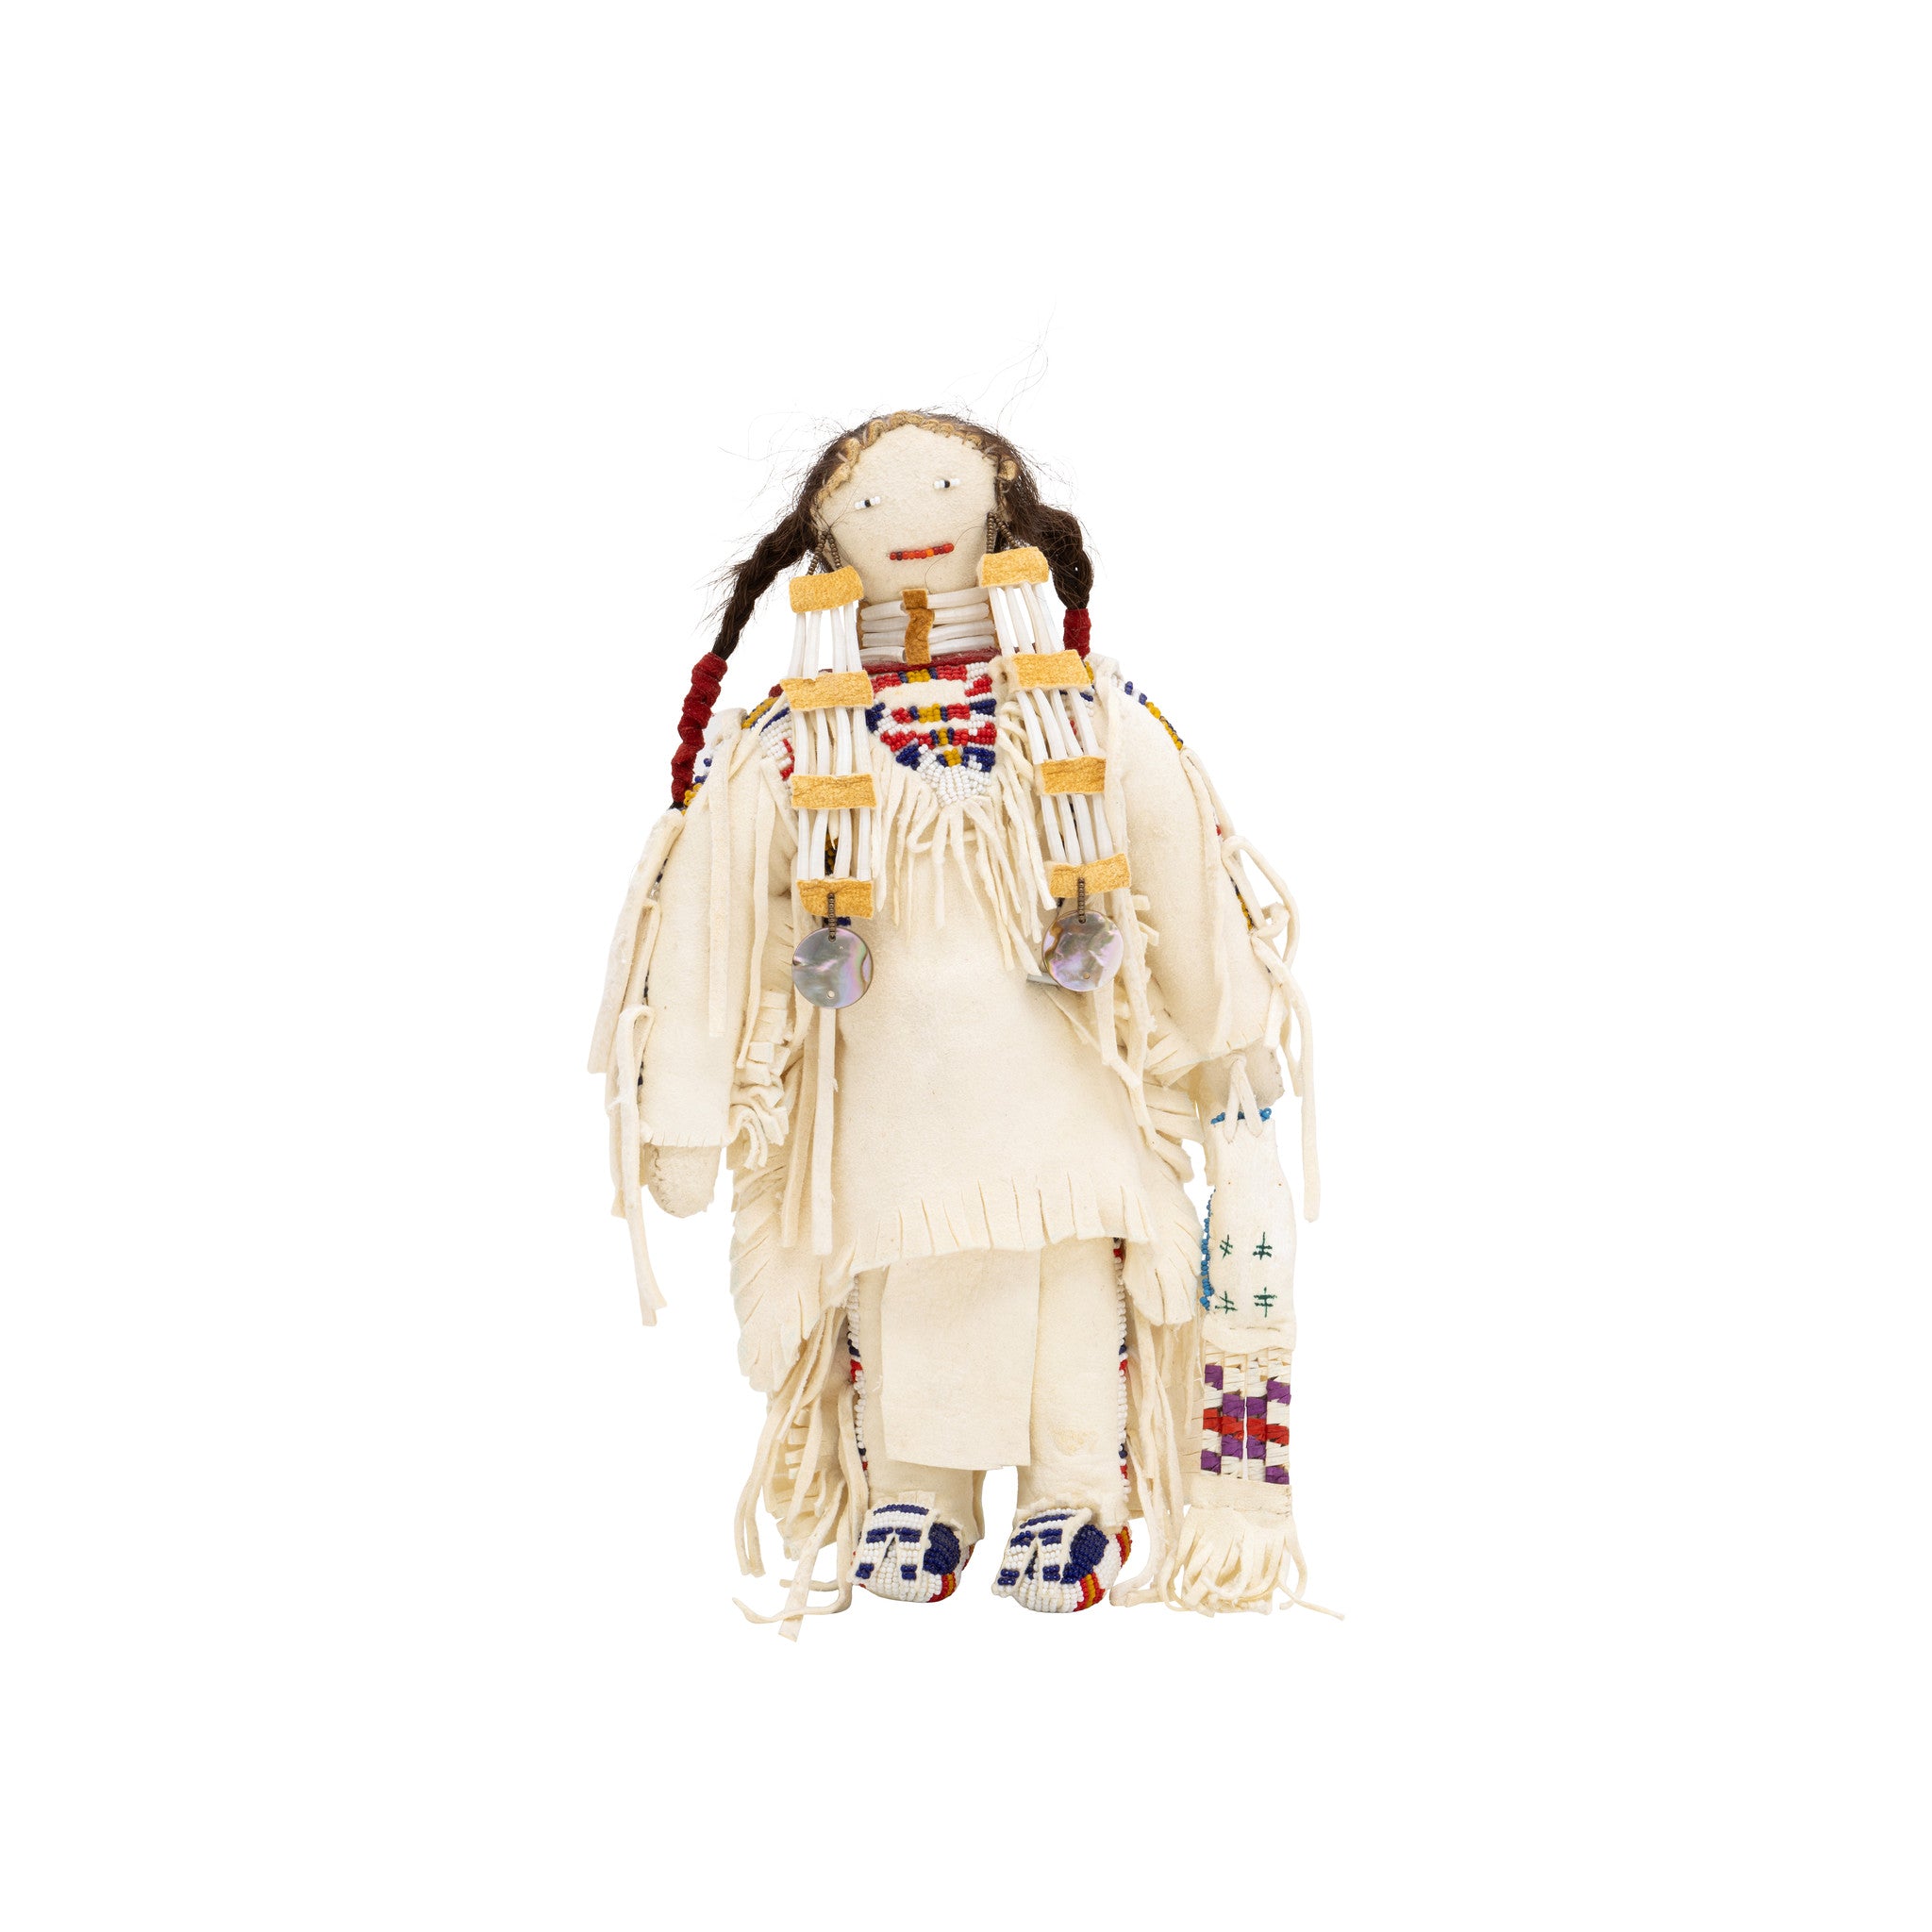 Pair of Sioux Dolls